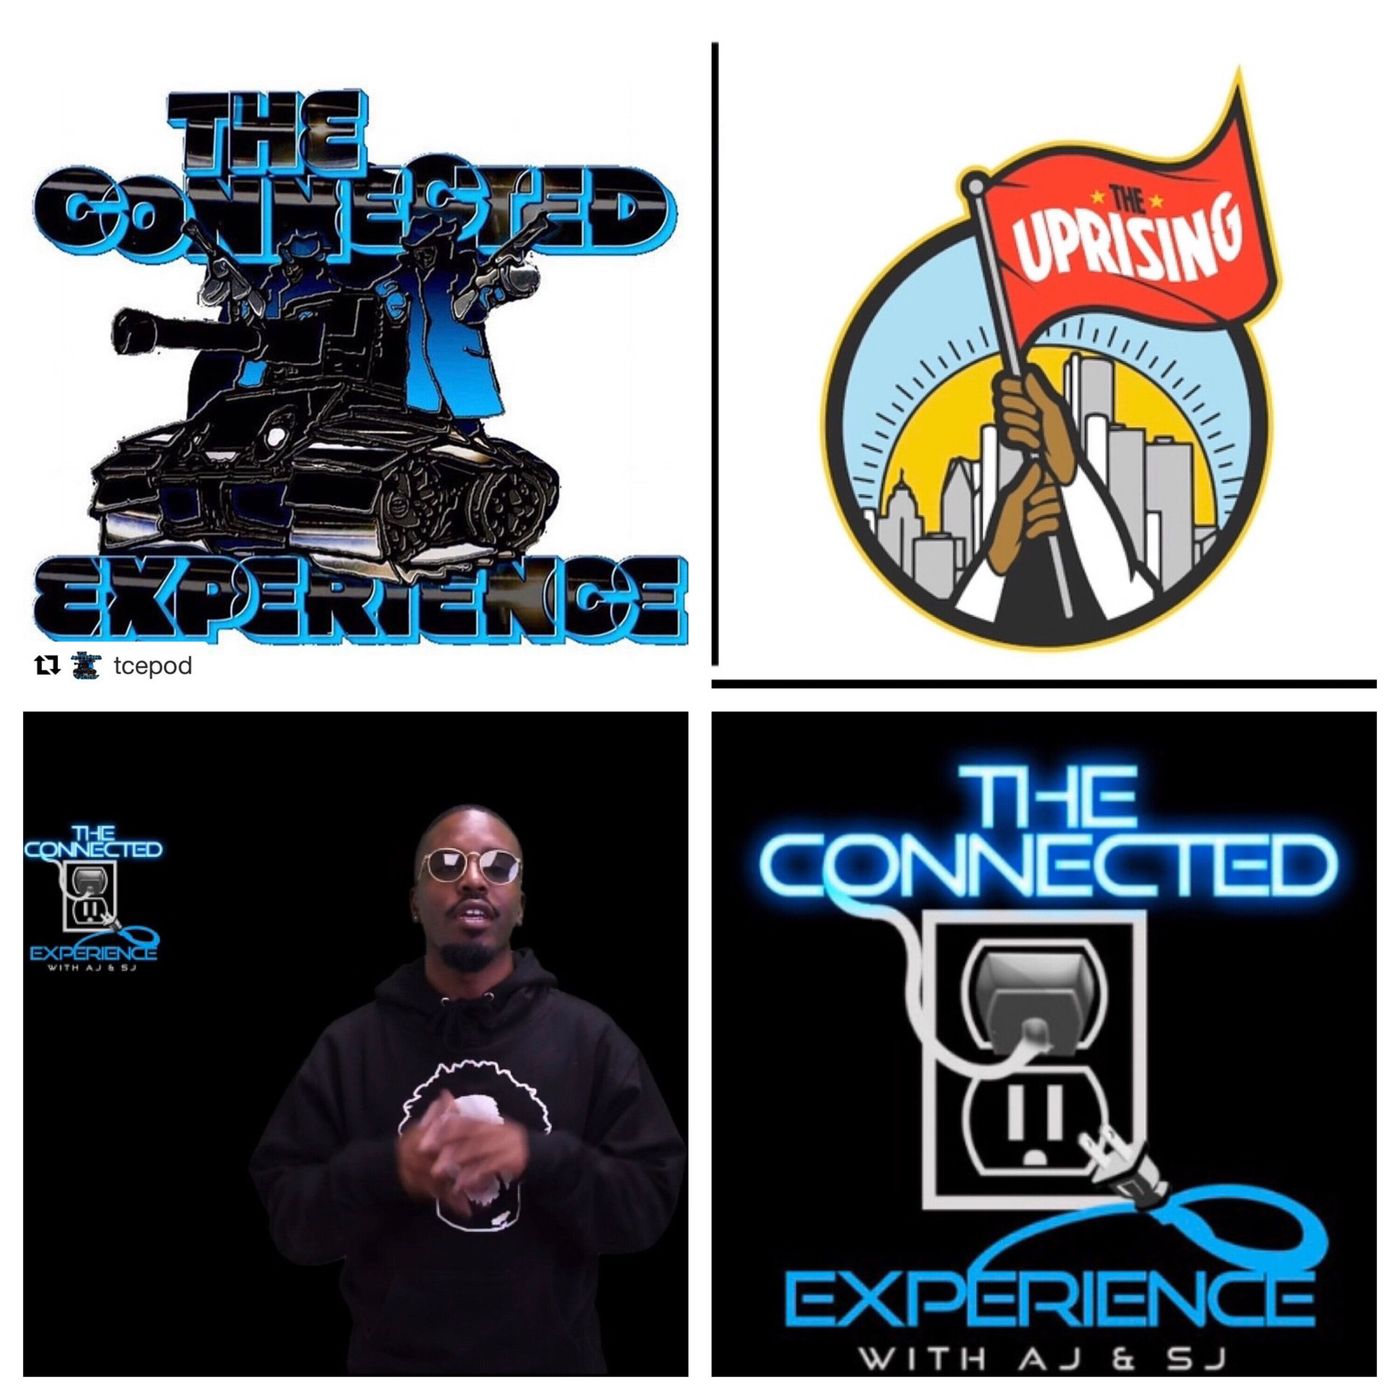 The Connected Experience - Respect The Uprising w Berry Jennings